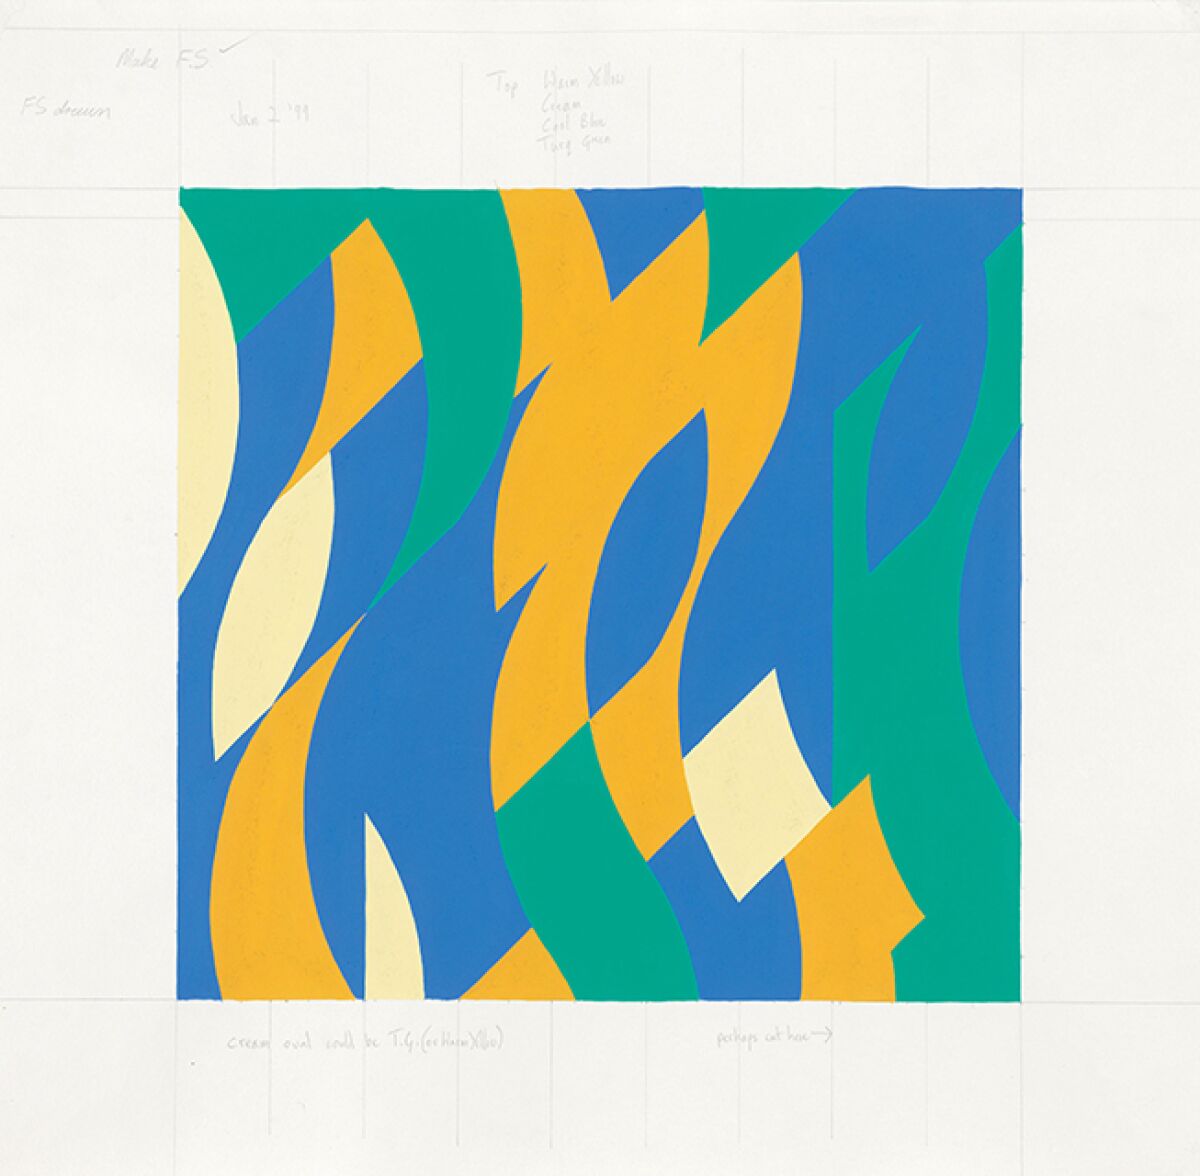 An artwork features geometric shapes in blue, teal, yellow and white